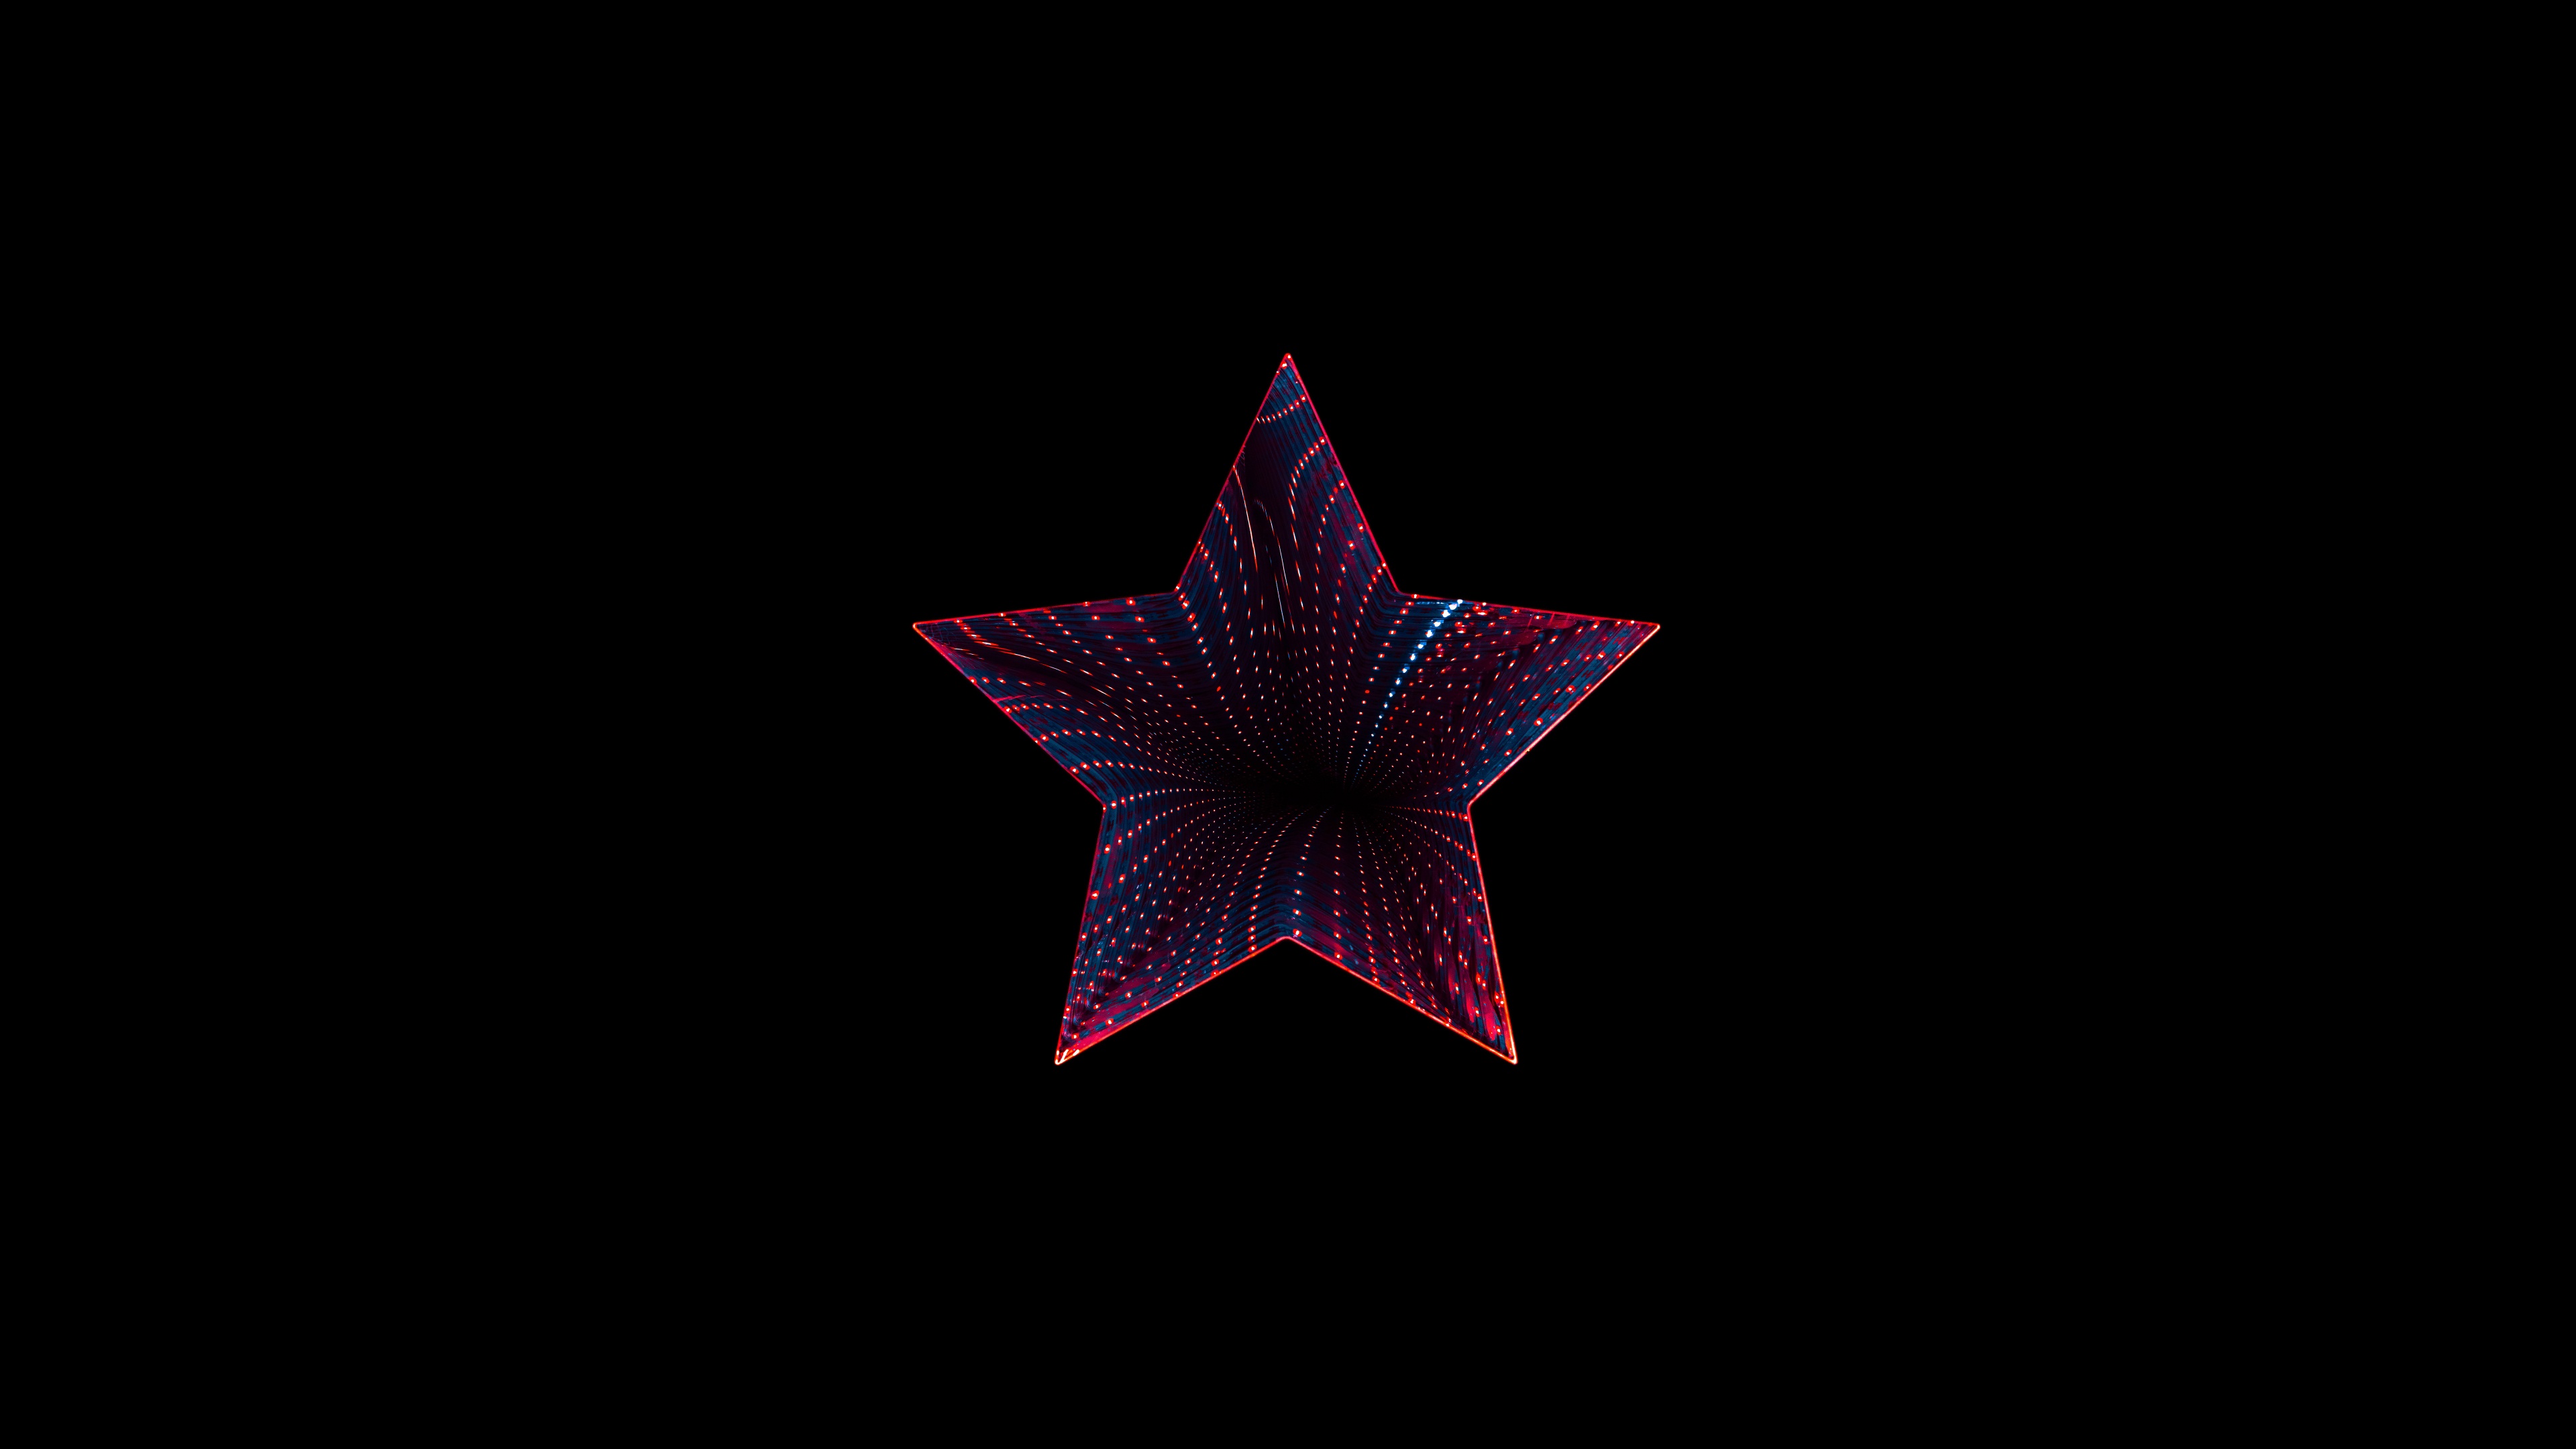 Star Wallpaper 4K, Neon, Black background, Abstract